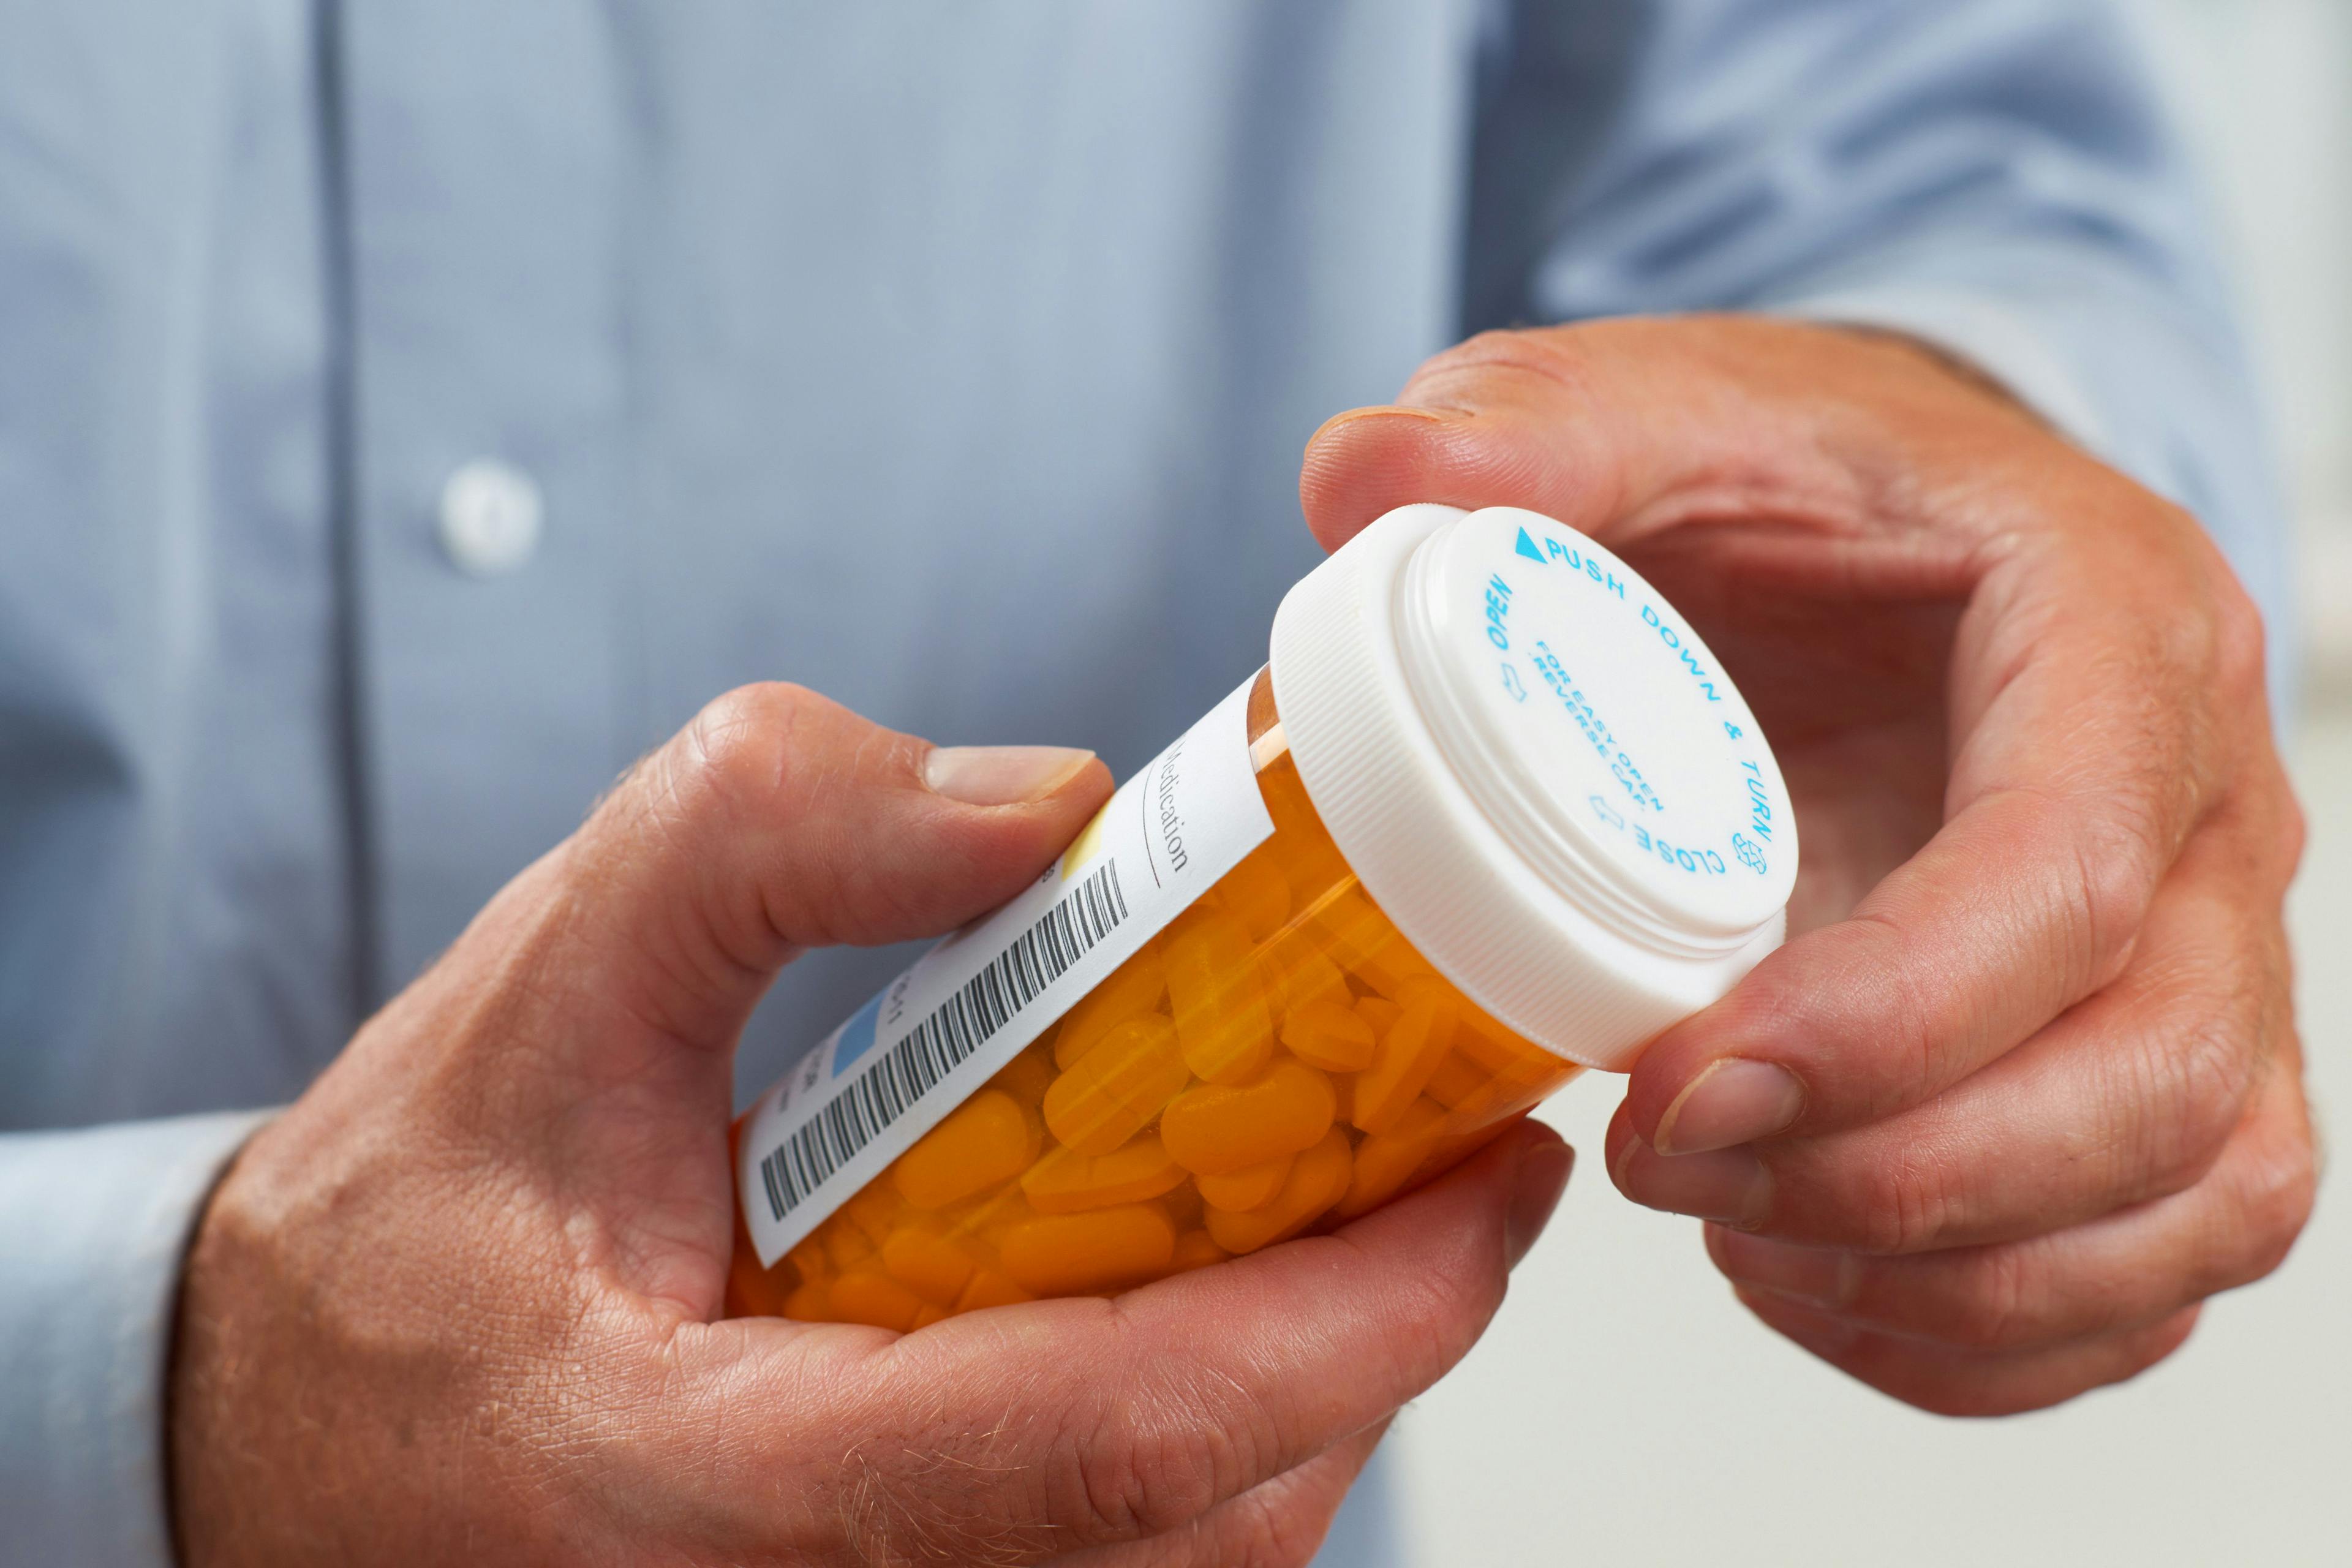 A patient with a blue button-up shirt holding an orange bottle of prescribed pills. ARV-471, a novel oral treatment, could be potentially approved by the FDA after it got a Fast Track designation.